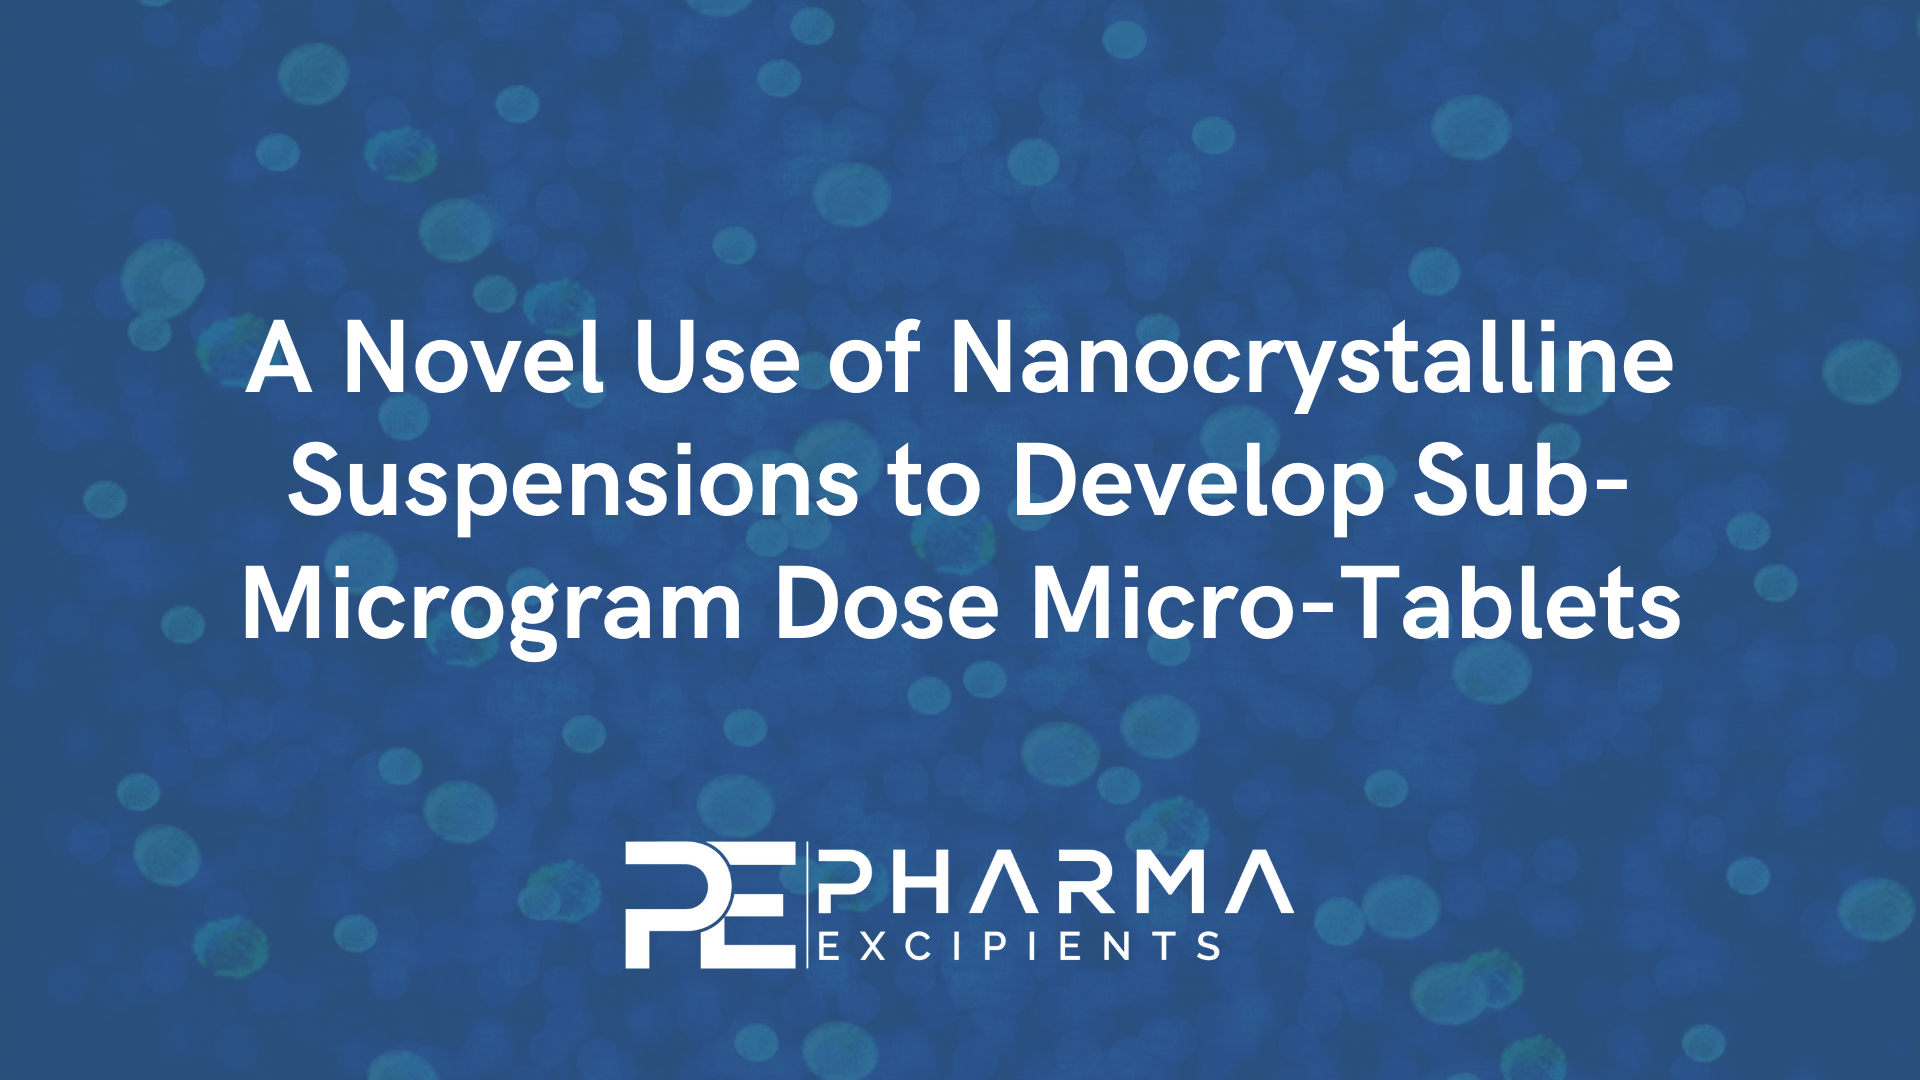 A Novel Use of Nanocrystalline Suspensions to Develop Sub-Microgram Dose Micro-Tablets